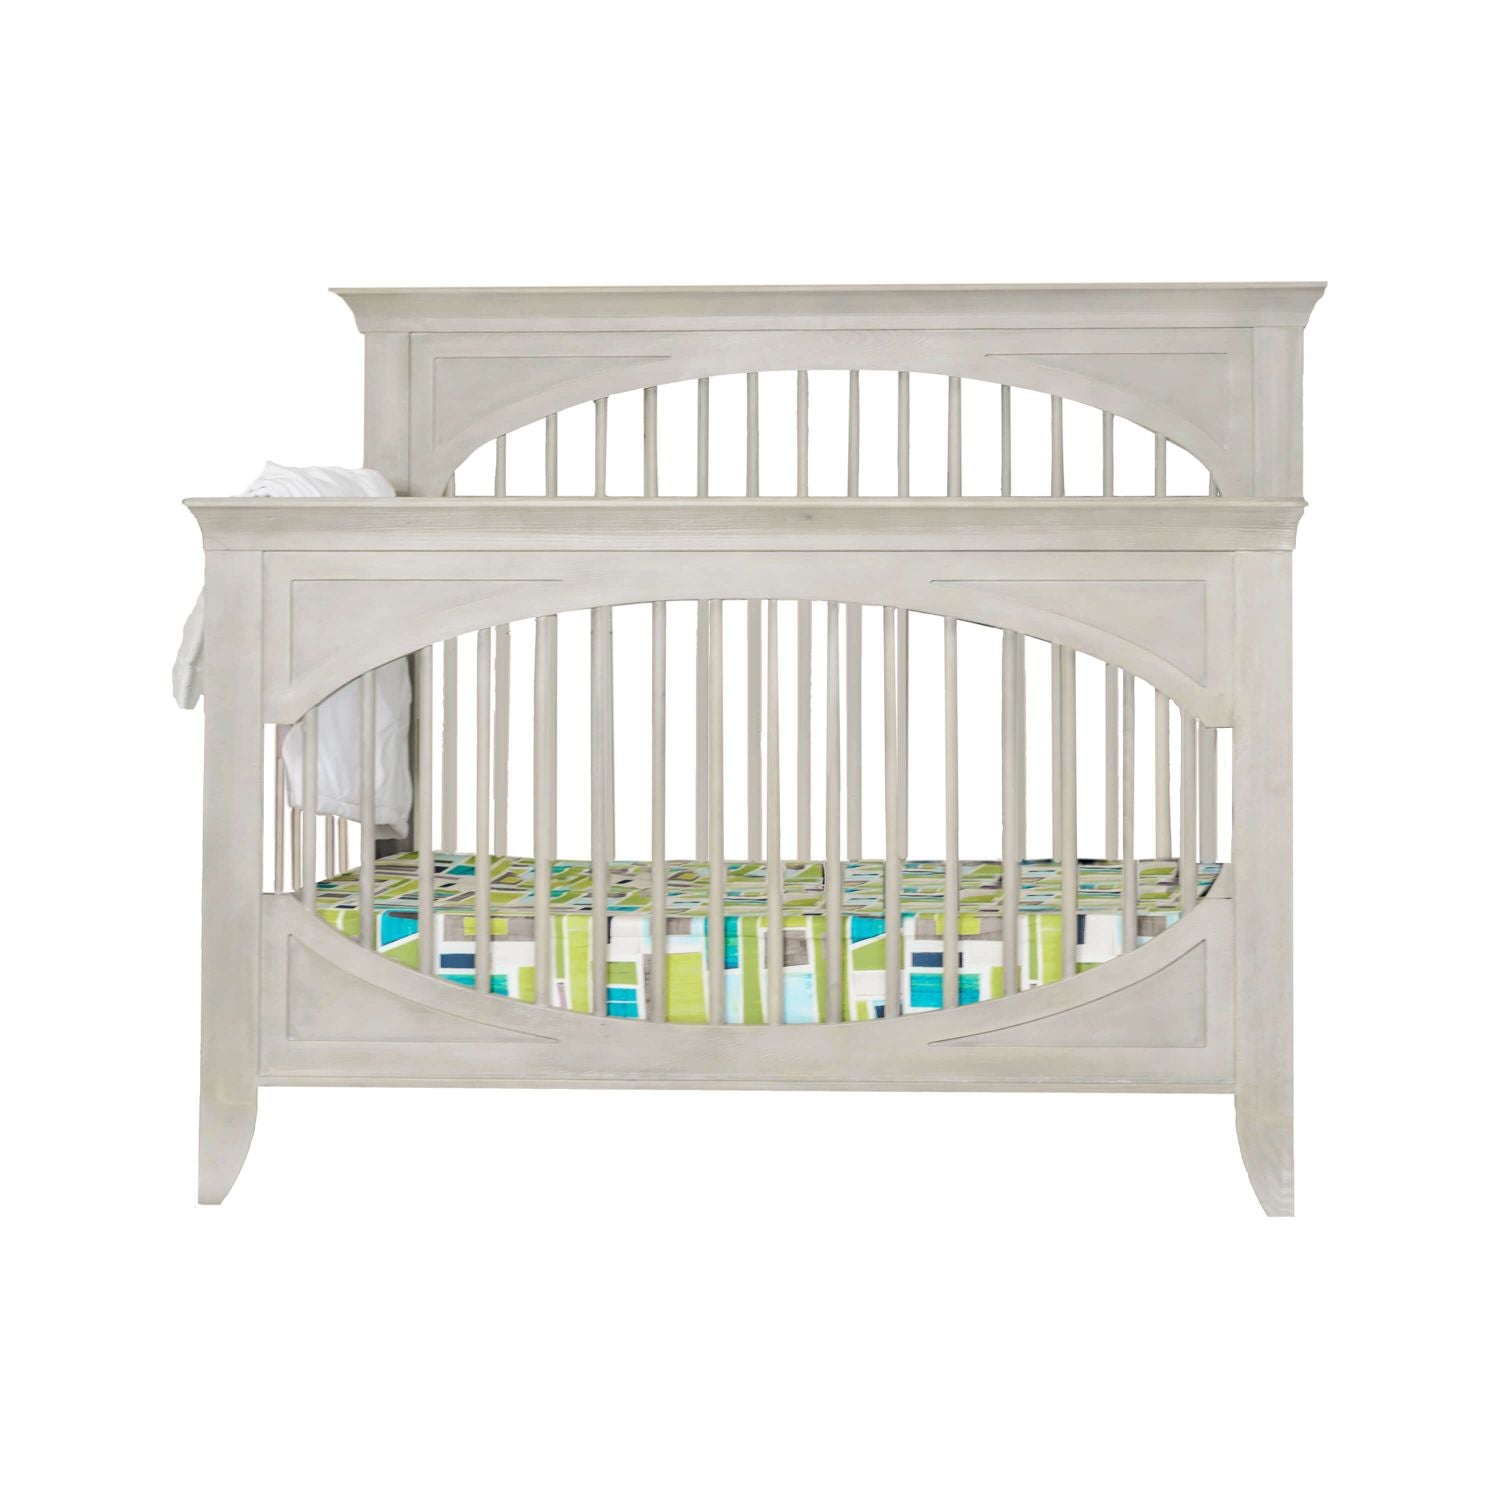 Shop the trend-setting vintage style crib from the CAMEO collection by Milk Street Baby. 